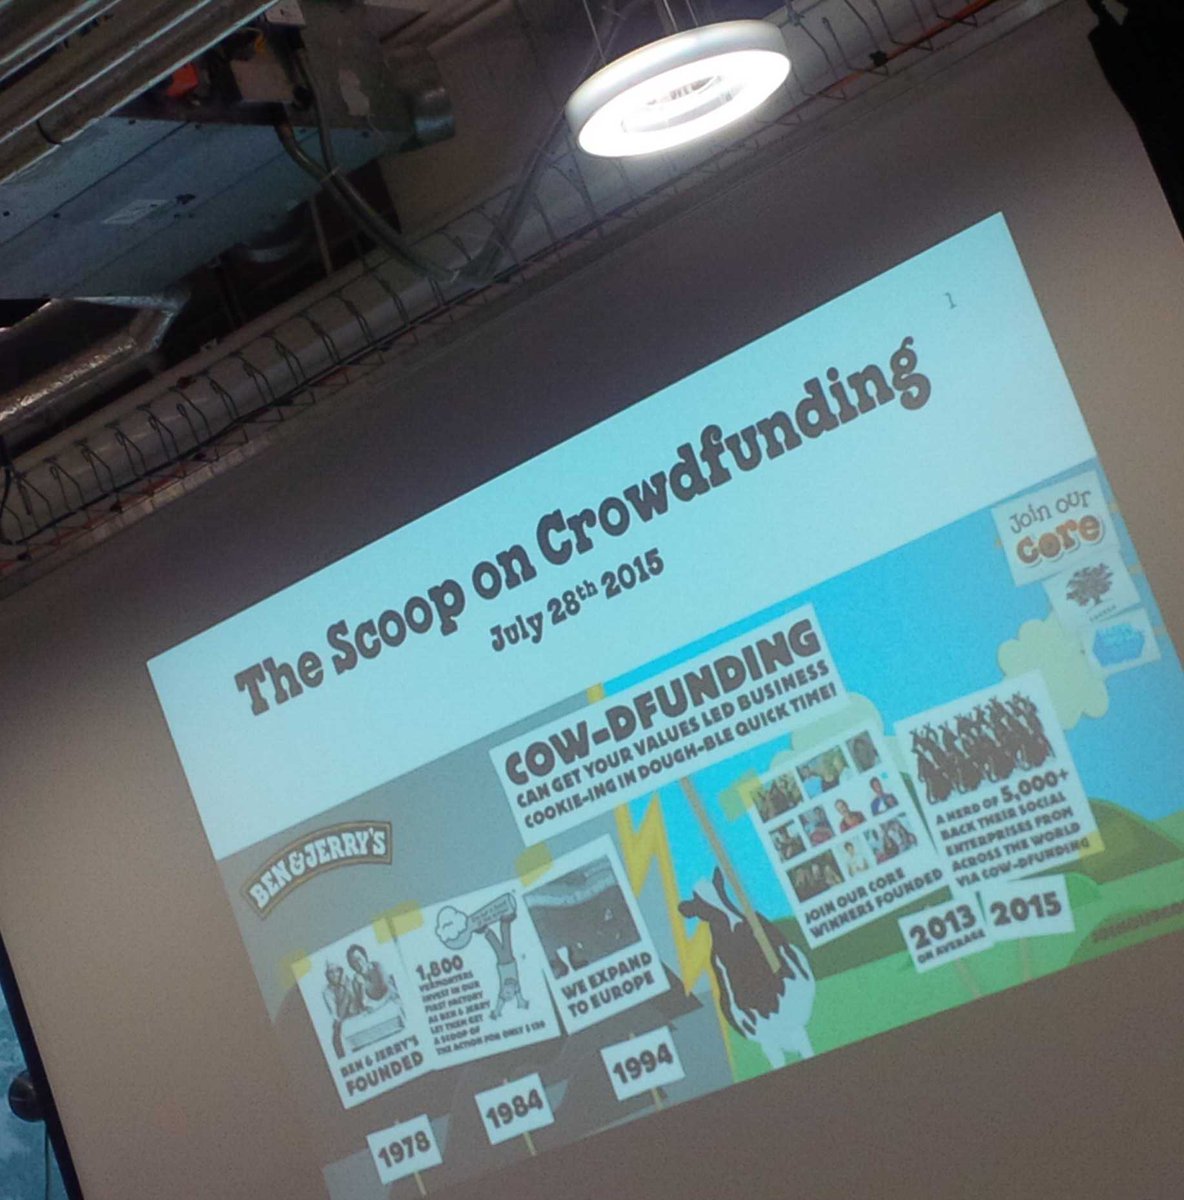 At @hubwestminster for the @benandjerrysUK The Scoop on crowdfunding event. #NewZelandHouse #Joinourcore